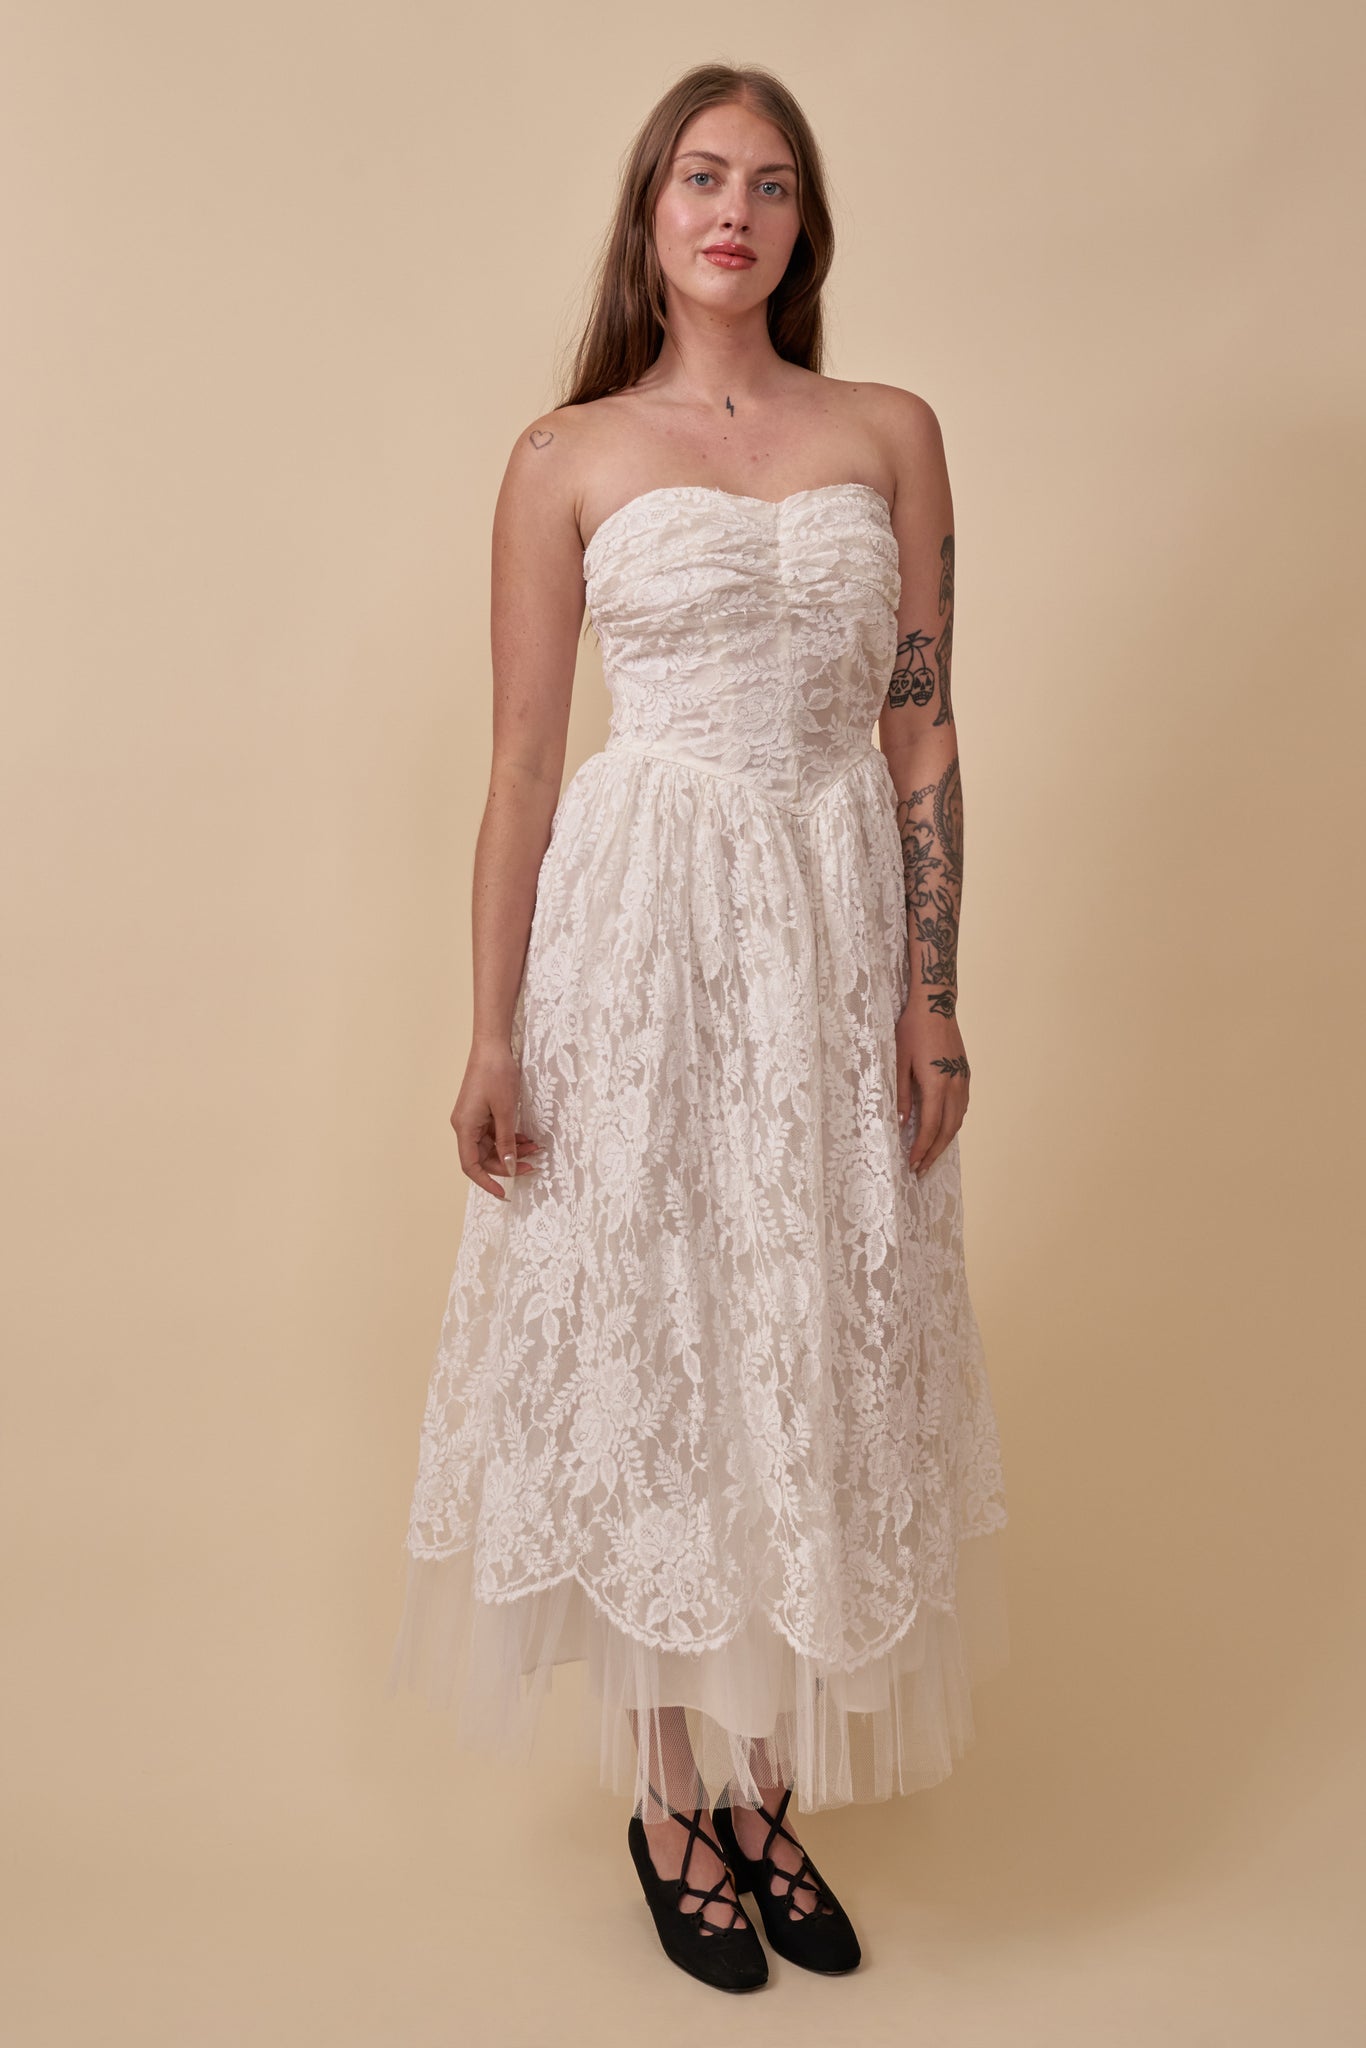 Charlotte Lace Gown - XS